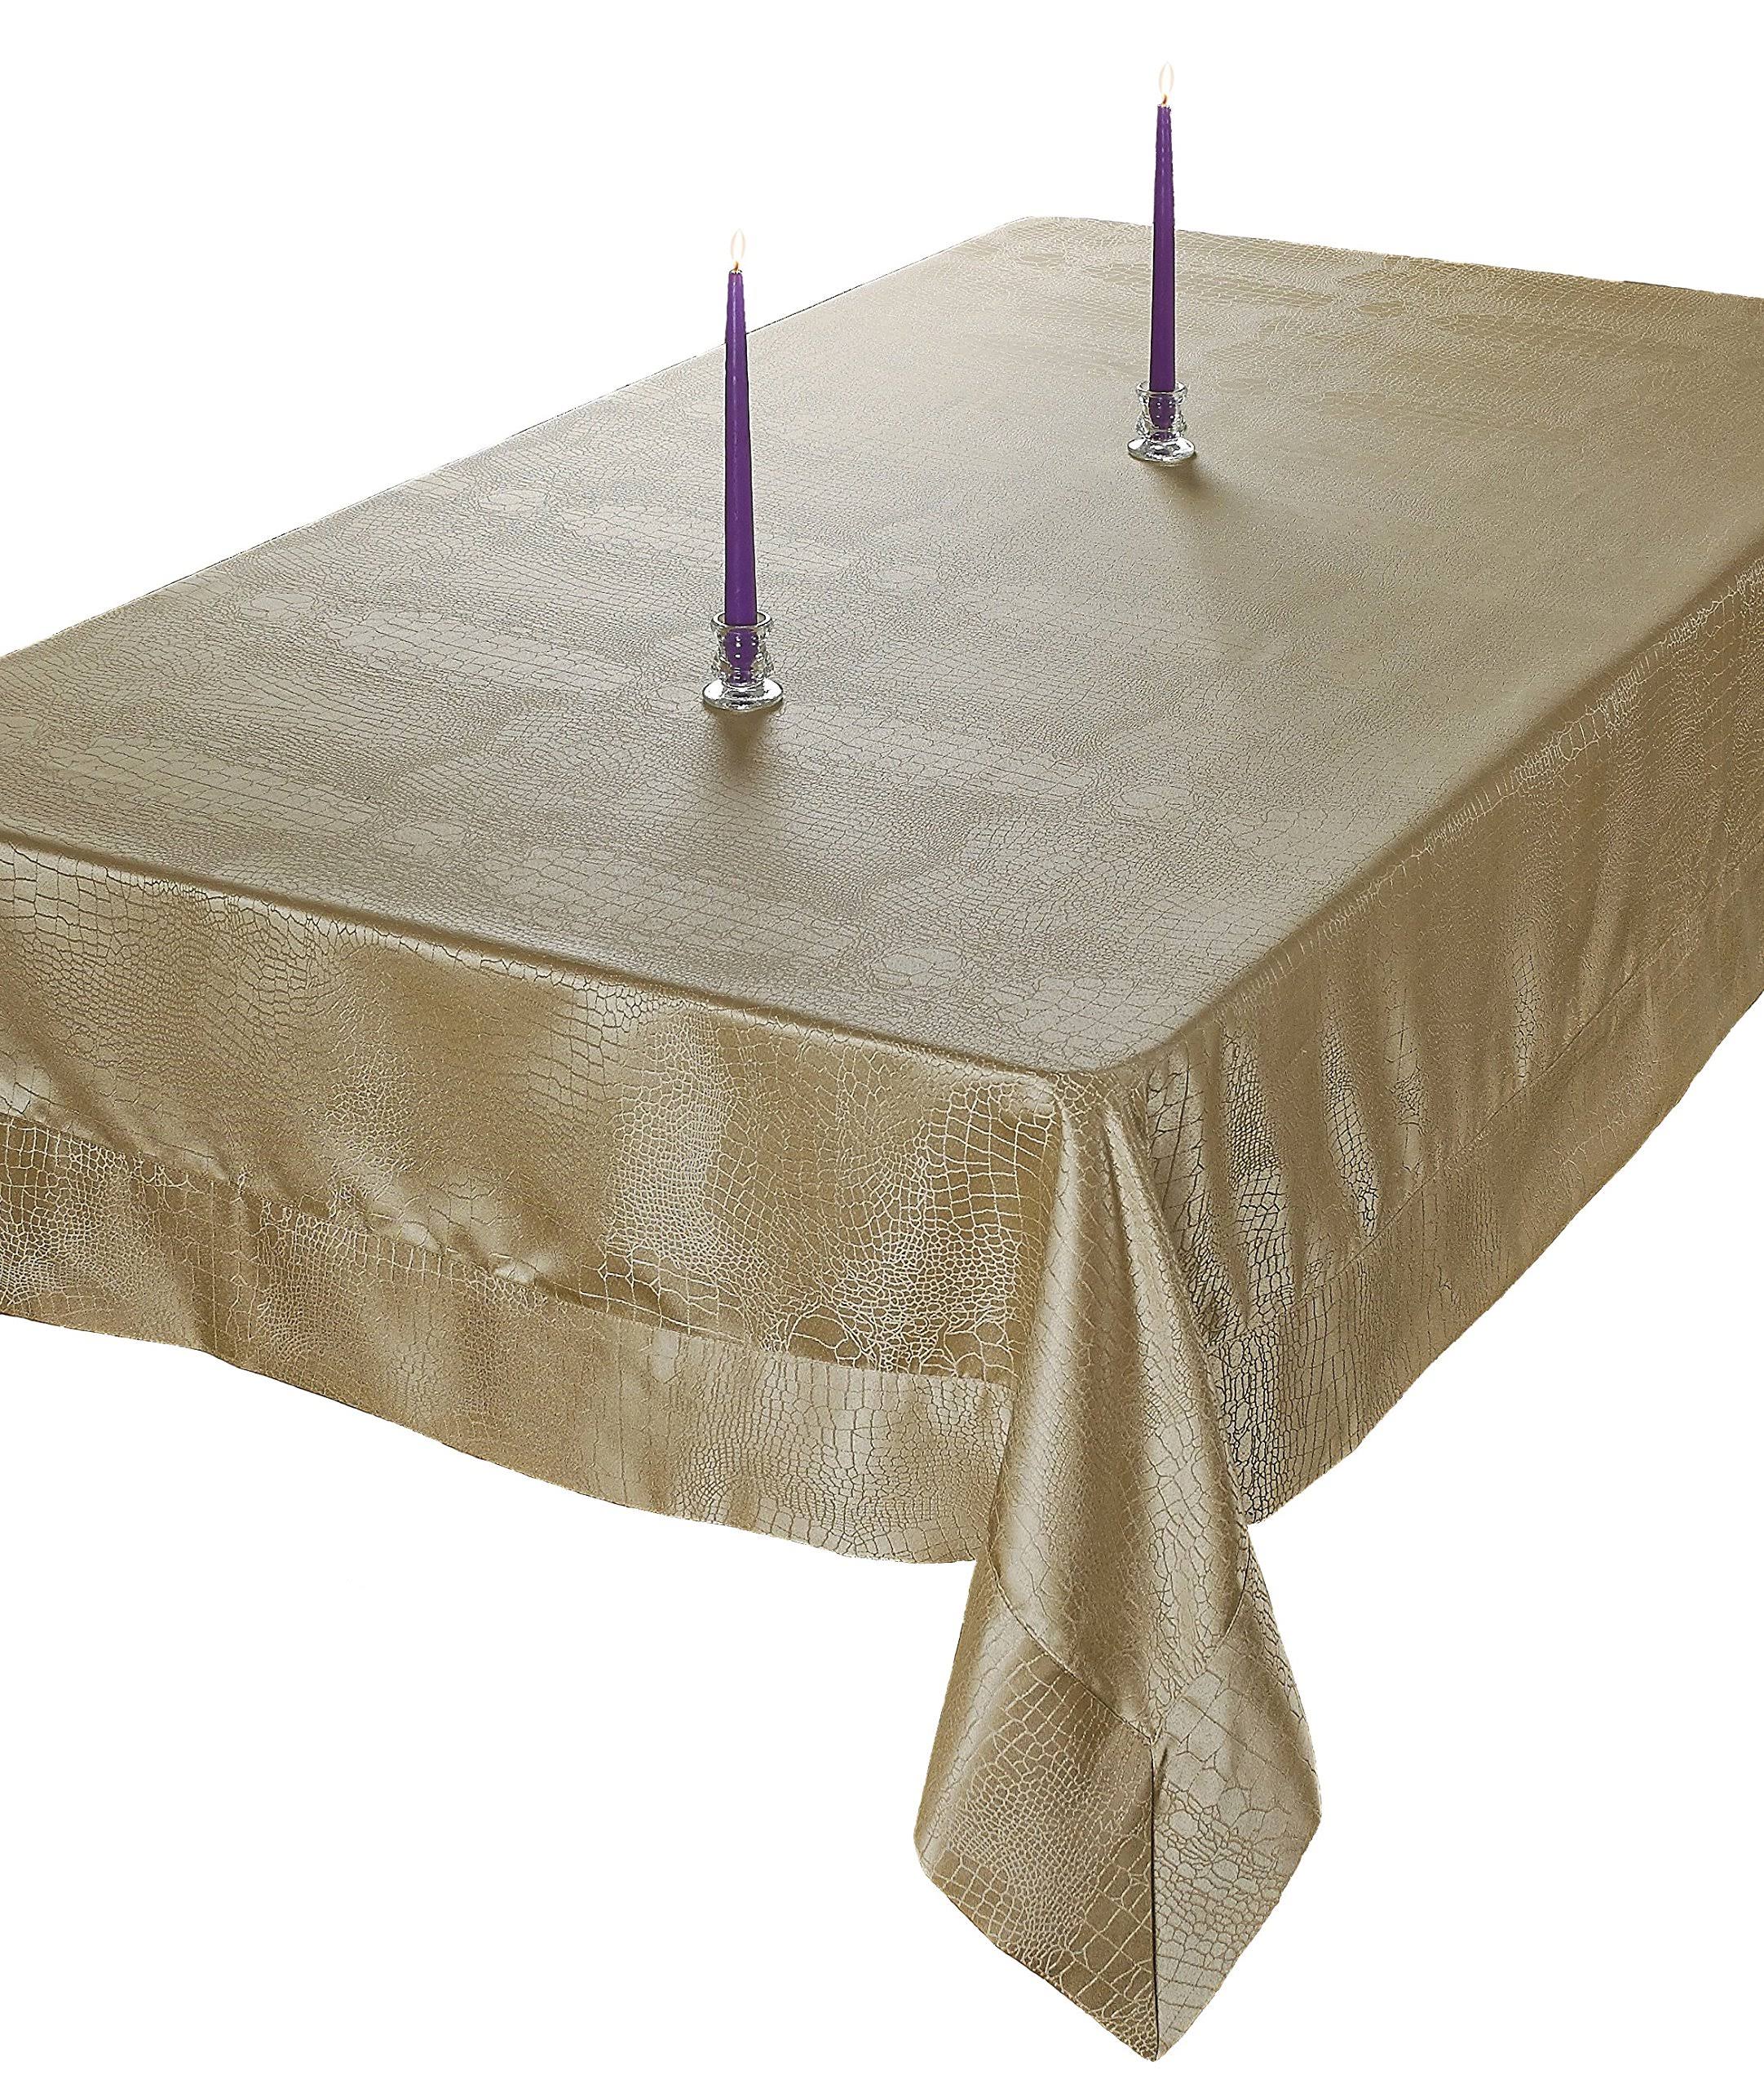 Luxurious Damask Crocodile Design Tablecloths | Textiles | 30 Day Money Back Guarantee | Best Price Guarantee | Delivery Guaranteed